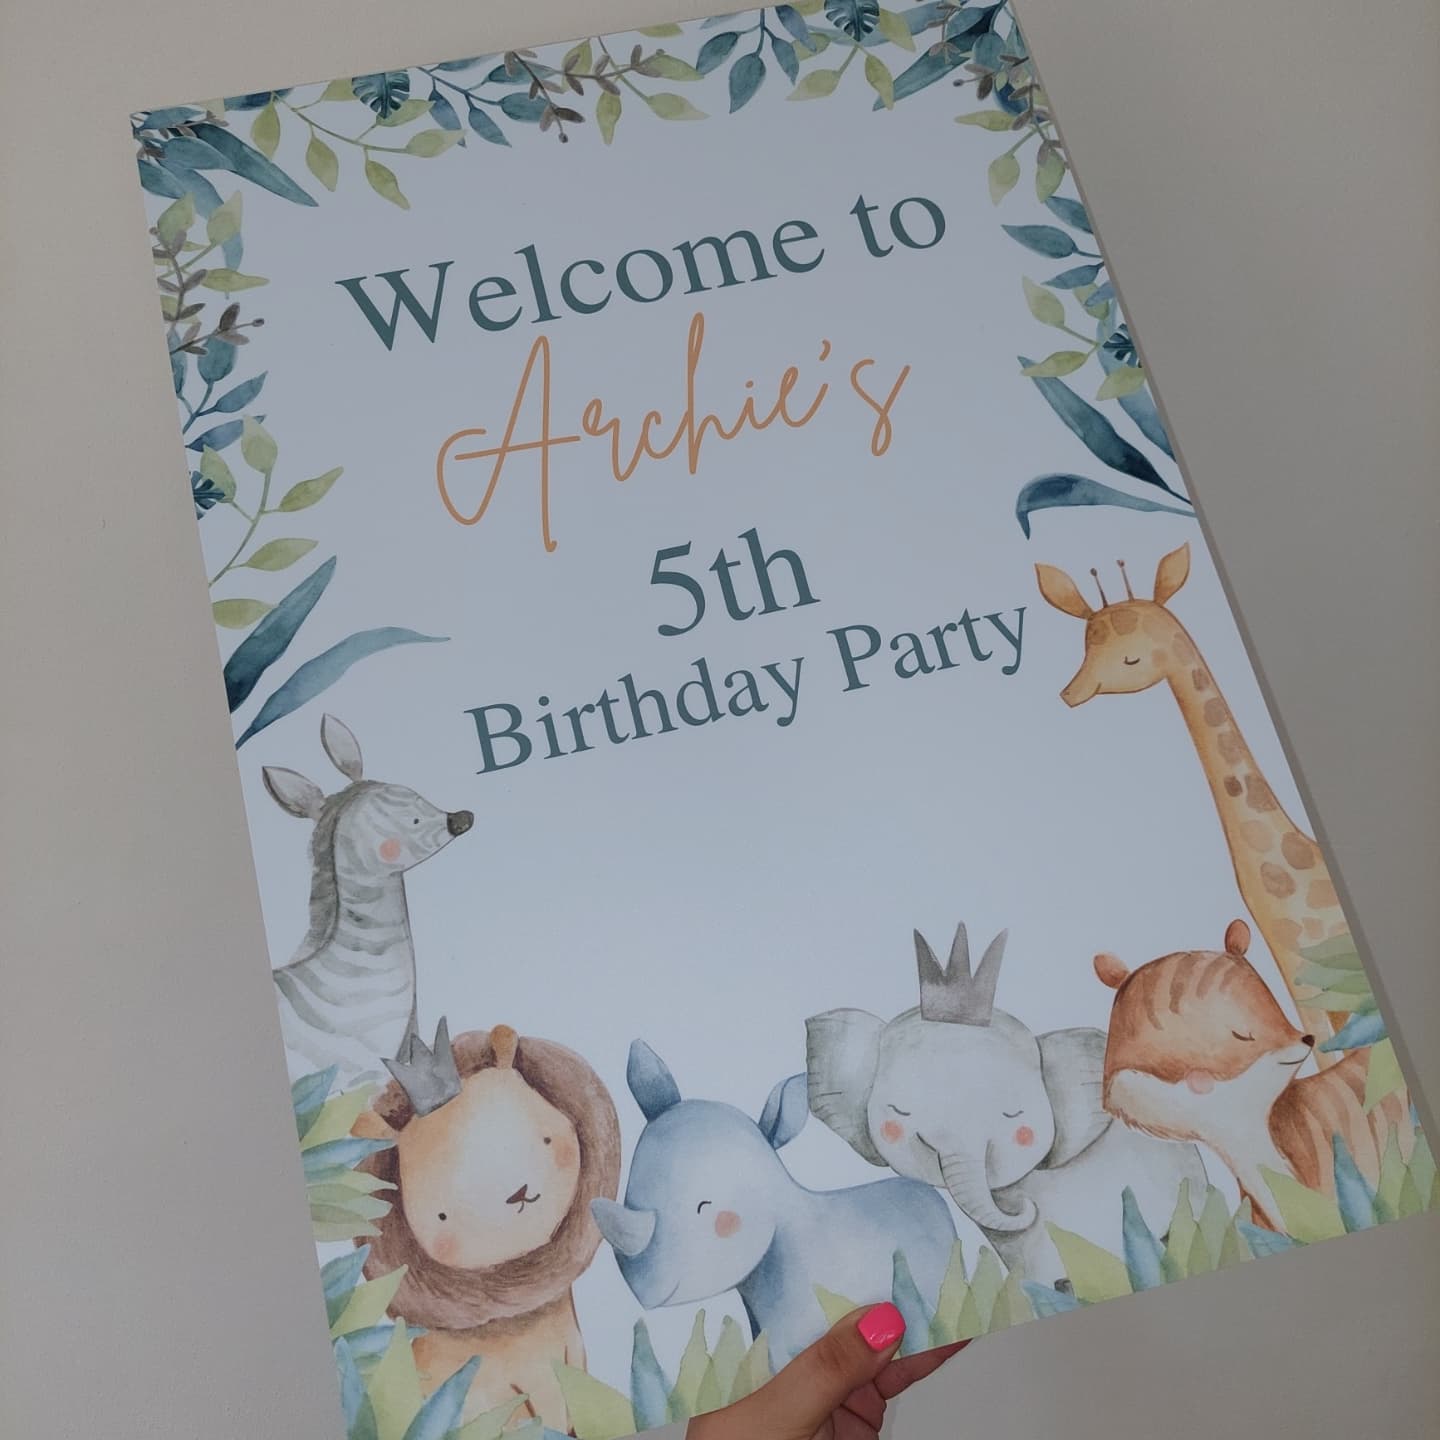 Safari Animal Welcome Board Sign | Personalised Birthday Board | Birthday Party Sign | Safari Animal Party Theme | A4, A3, A2